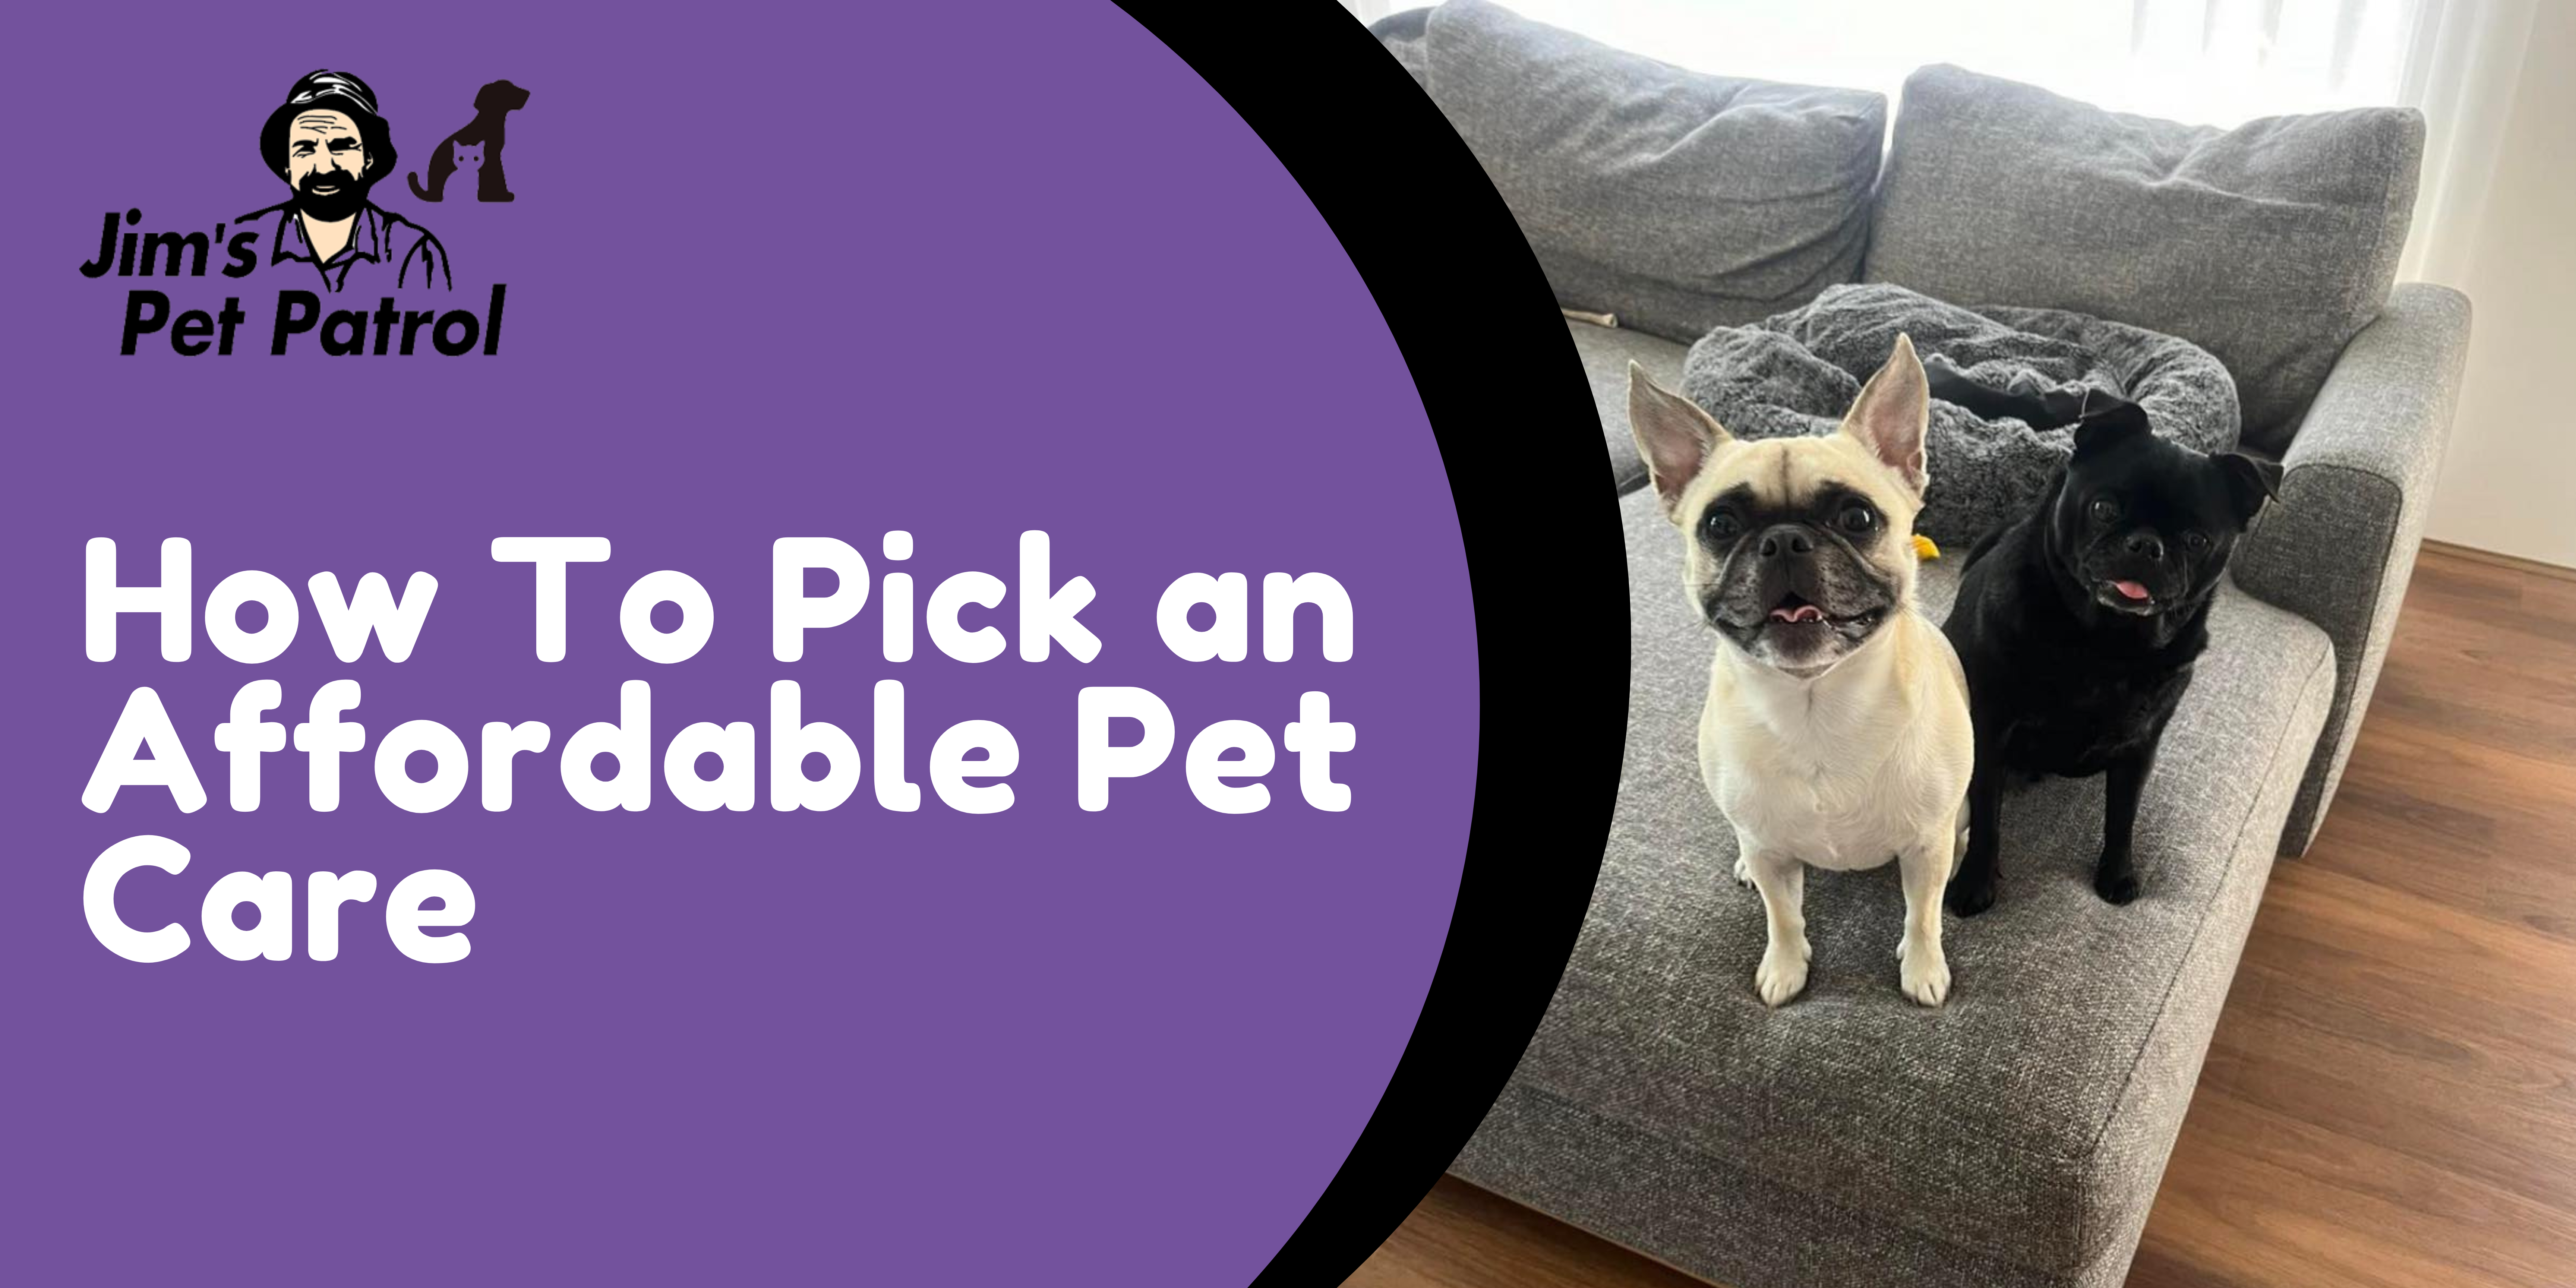 How To Pick an Affordable Pet Care